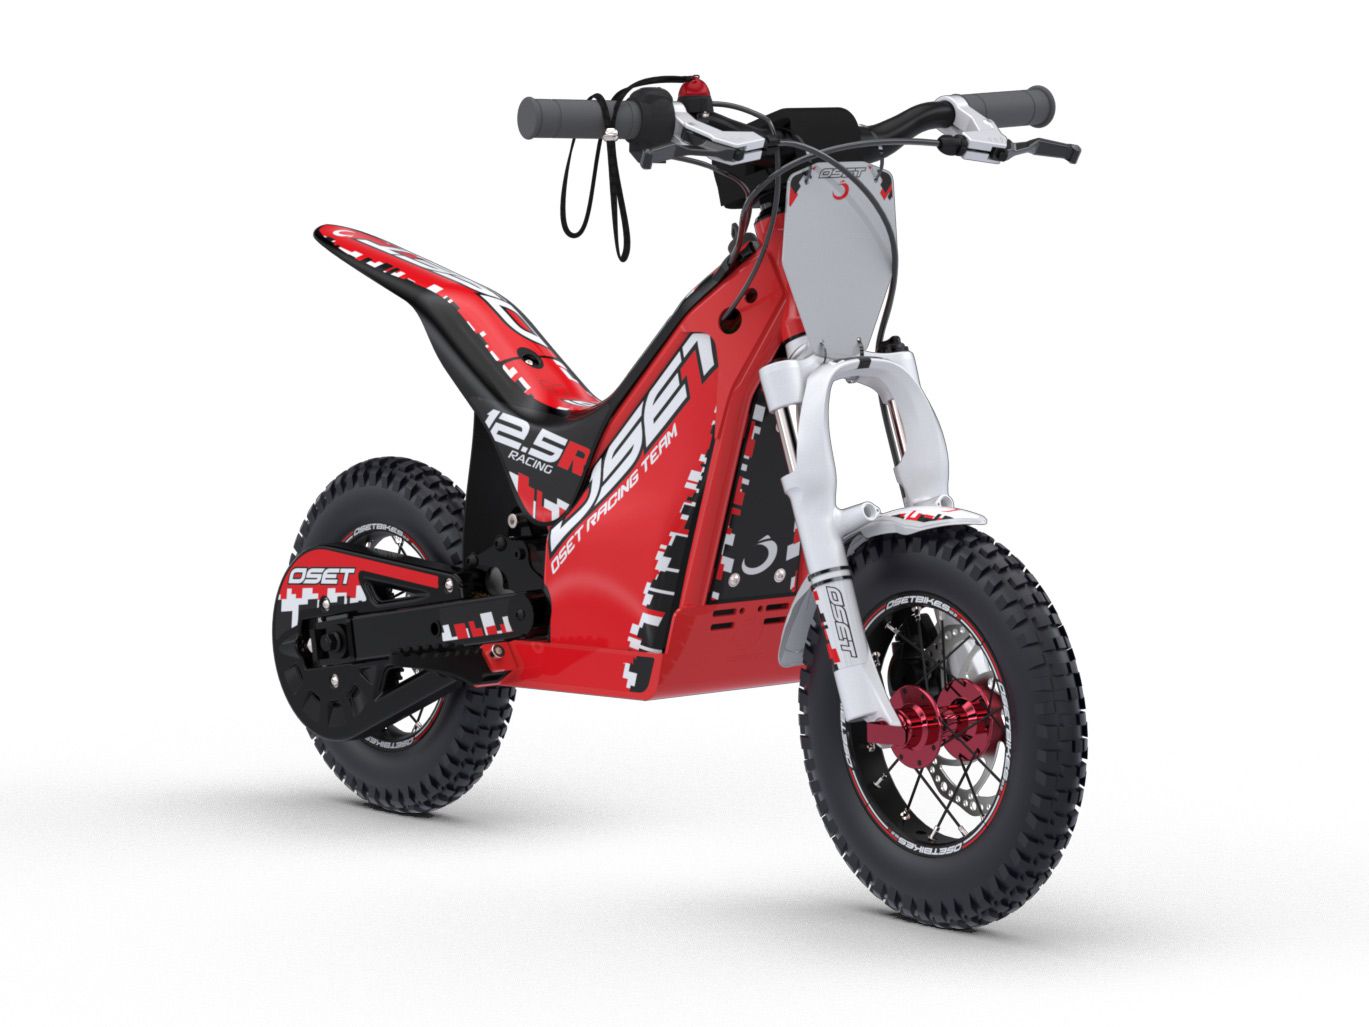 Mini trials bikes like the 12.5R (depicted) and 16.0R prepare kids for the big leagues like Oset’s own 20.0R and 24.0R.